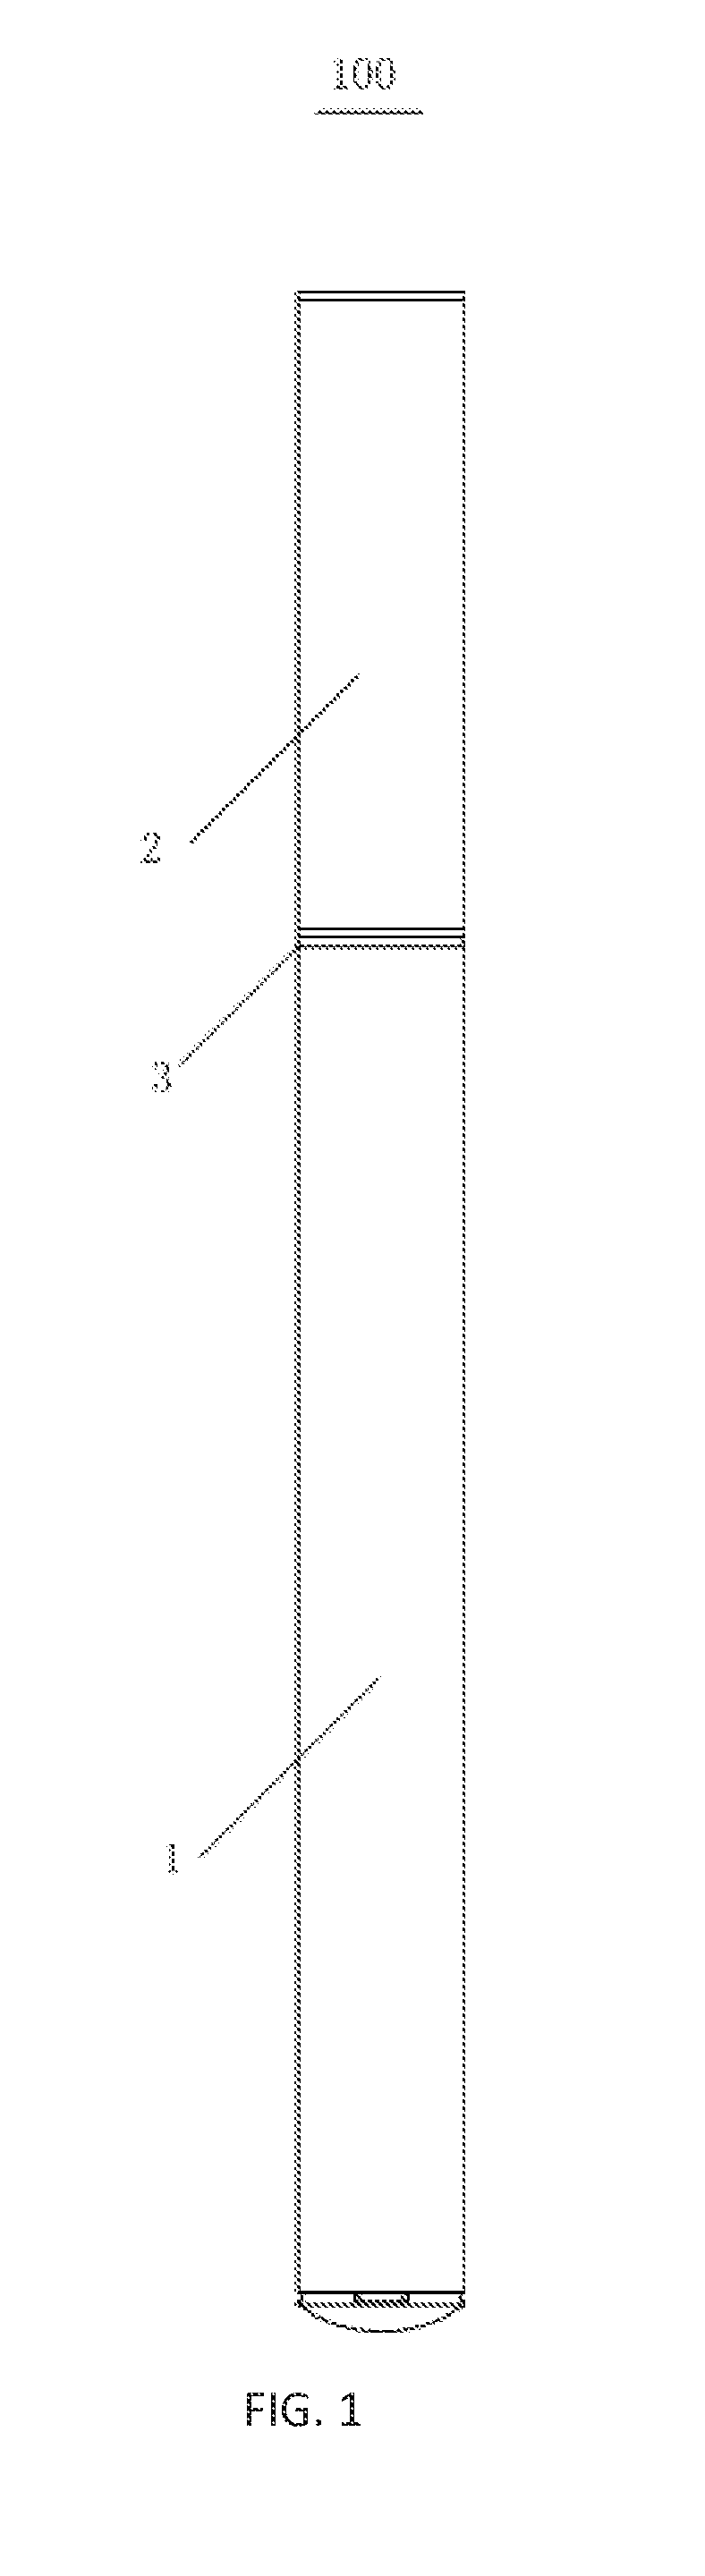 Connecting head of an electronic cigarette and electronic cigarette